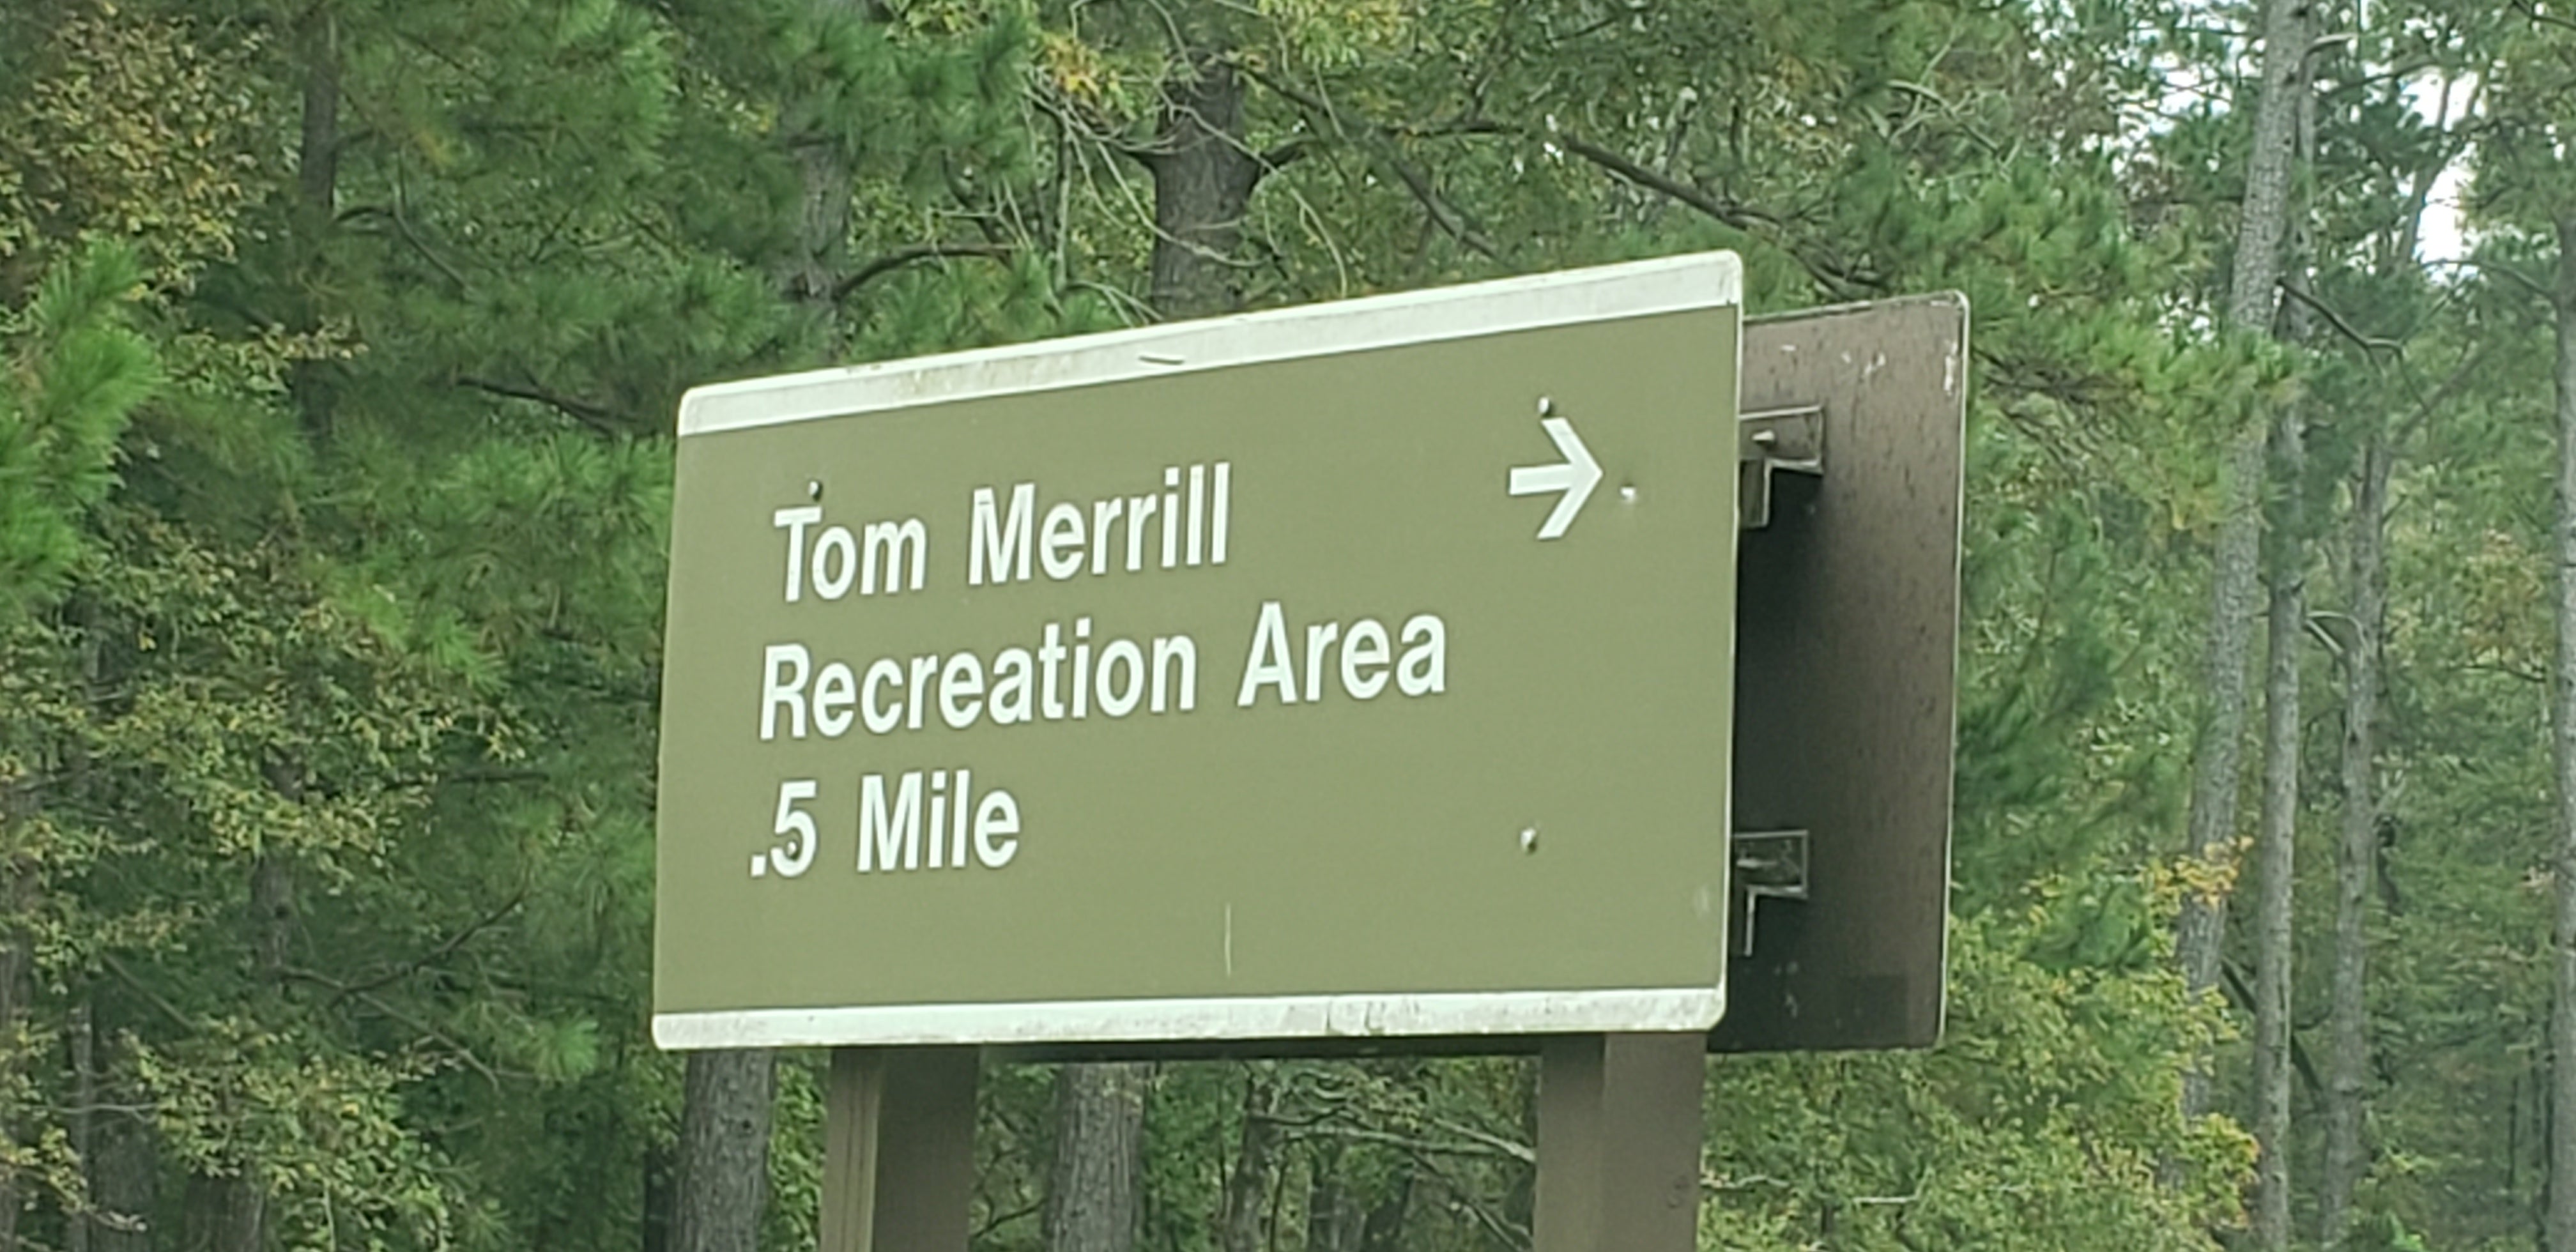 Camper submitted image from Tom Merrill Recreation Area - 5